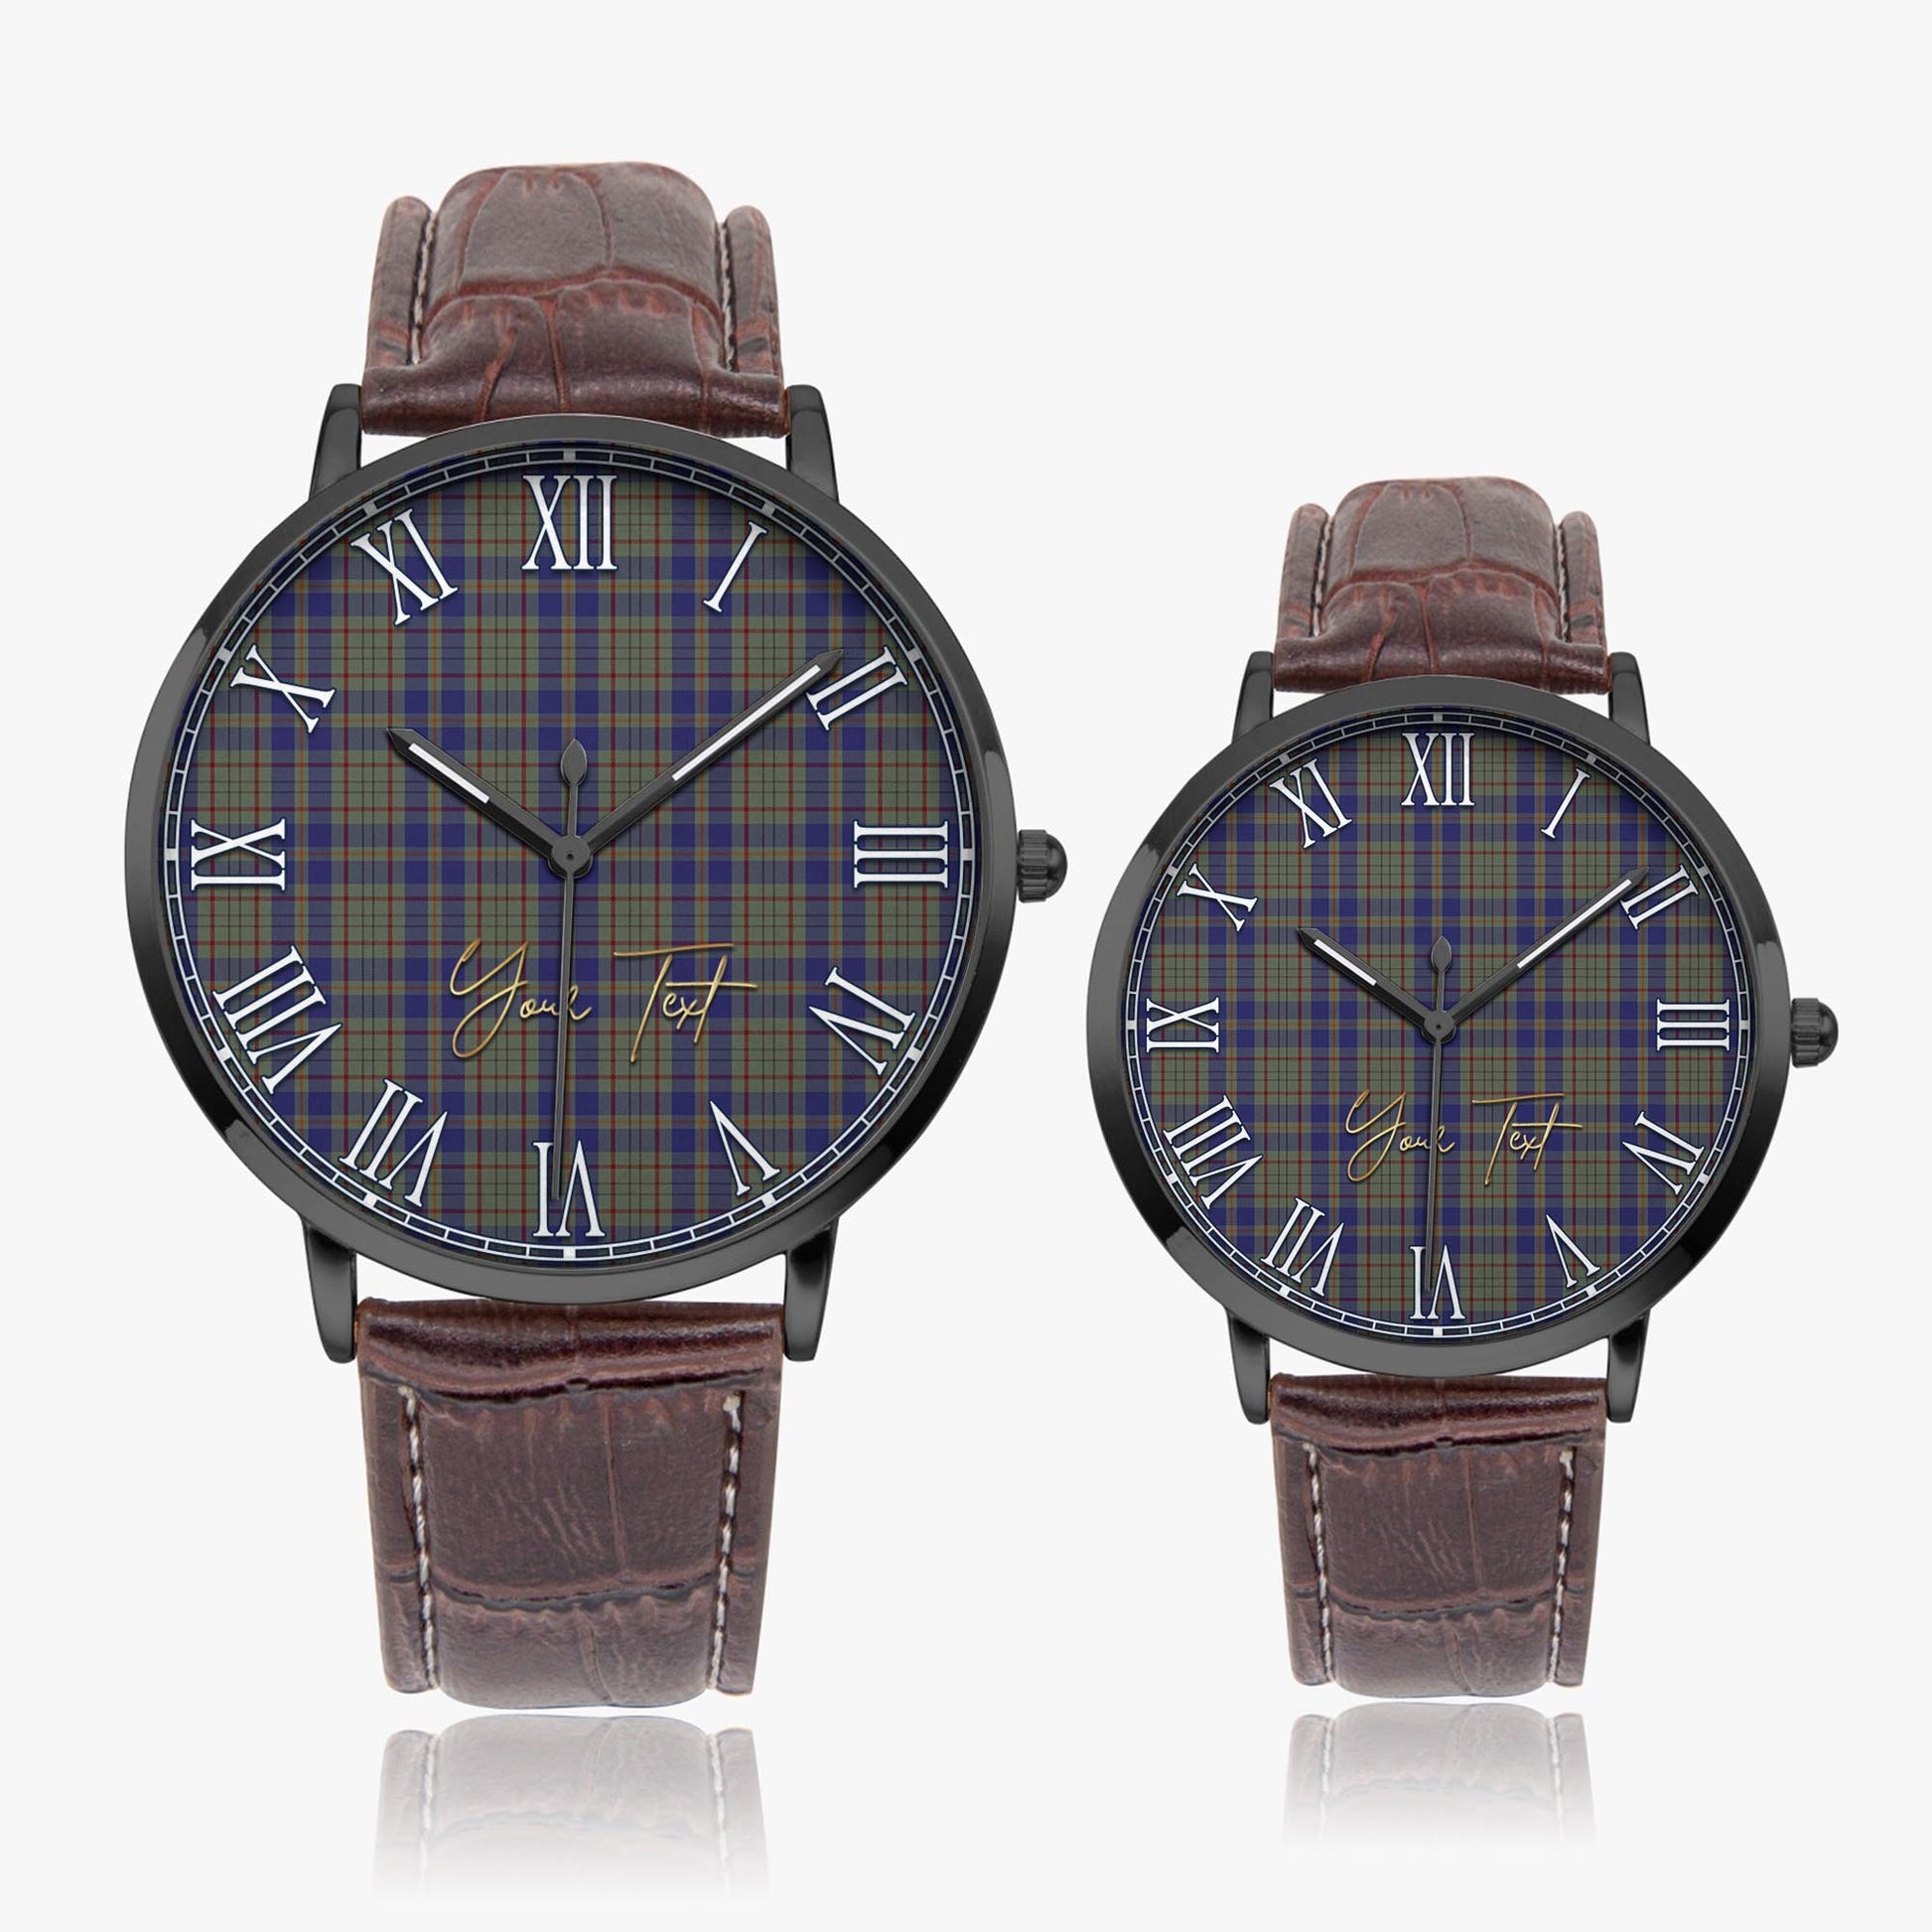 Kildare County Ireland Tartan Personalized Your Text Leather Trap Quartz Watch Ultra Thin Black Case With Brown Leather Strap - Tartanvibesclothing